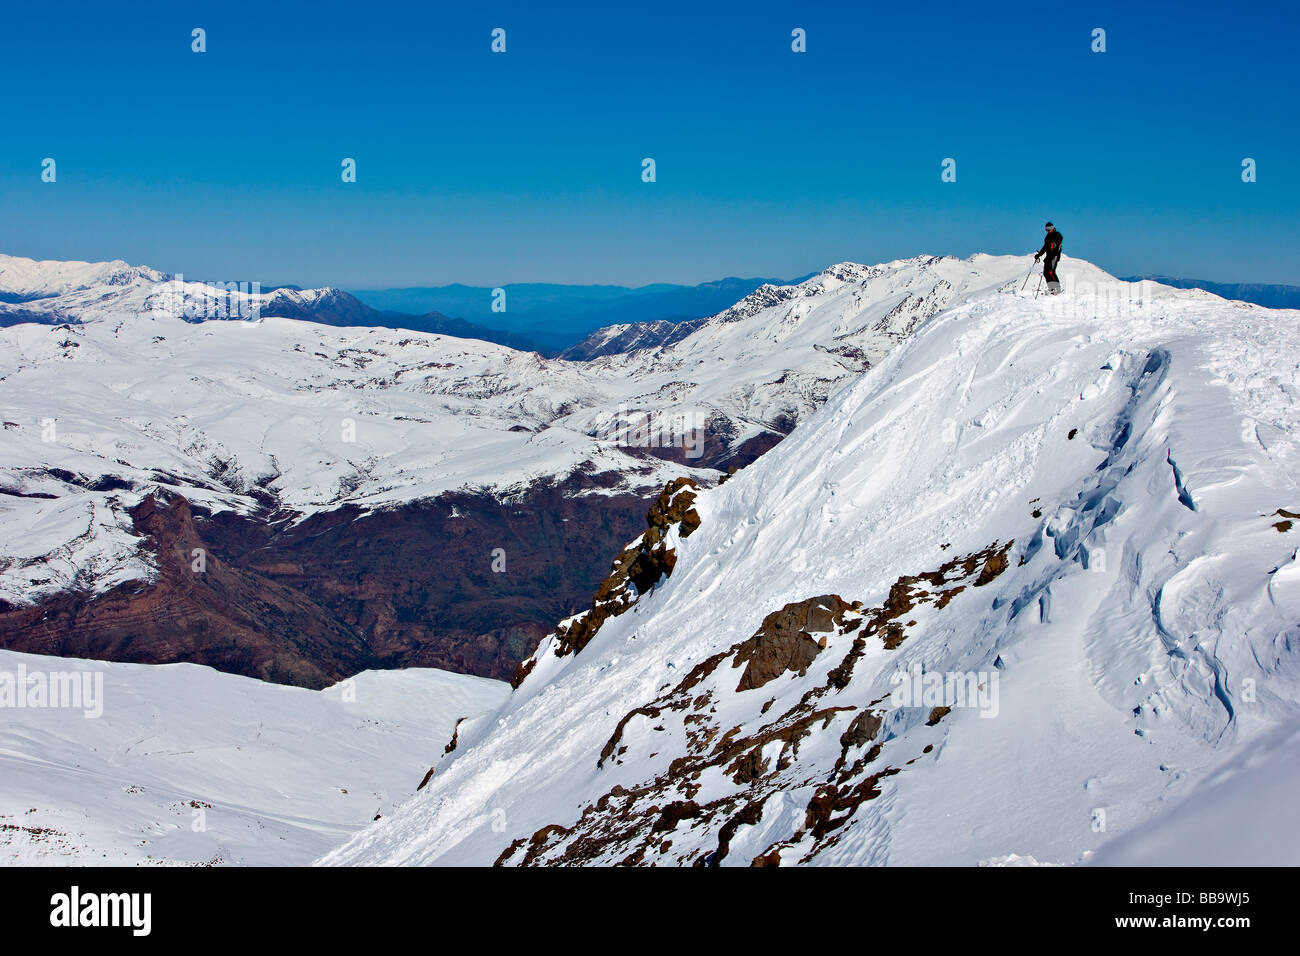 man on top of snowy mountain (Chilean Andes) Stock Photo